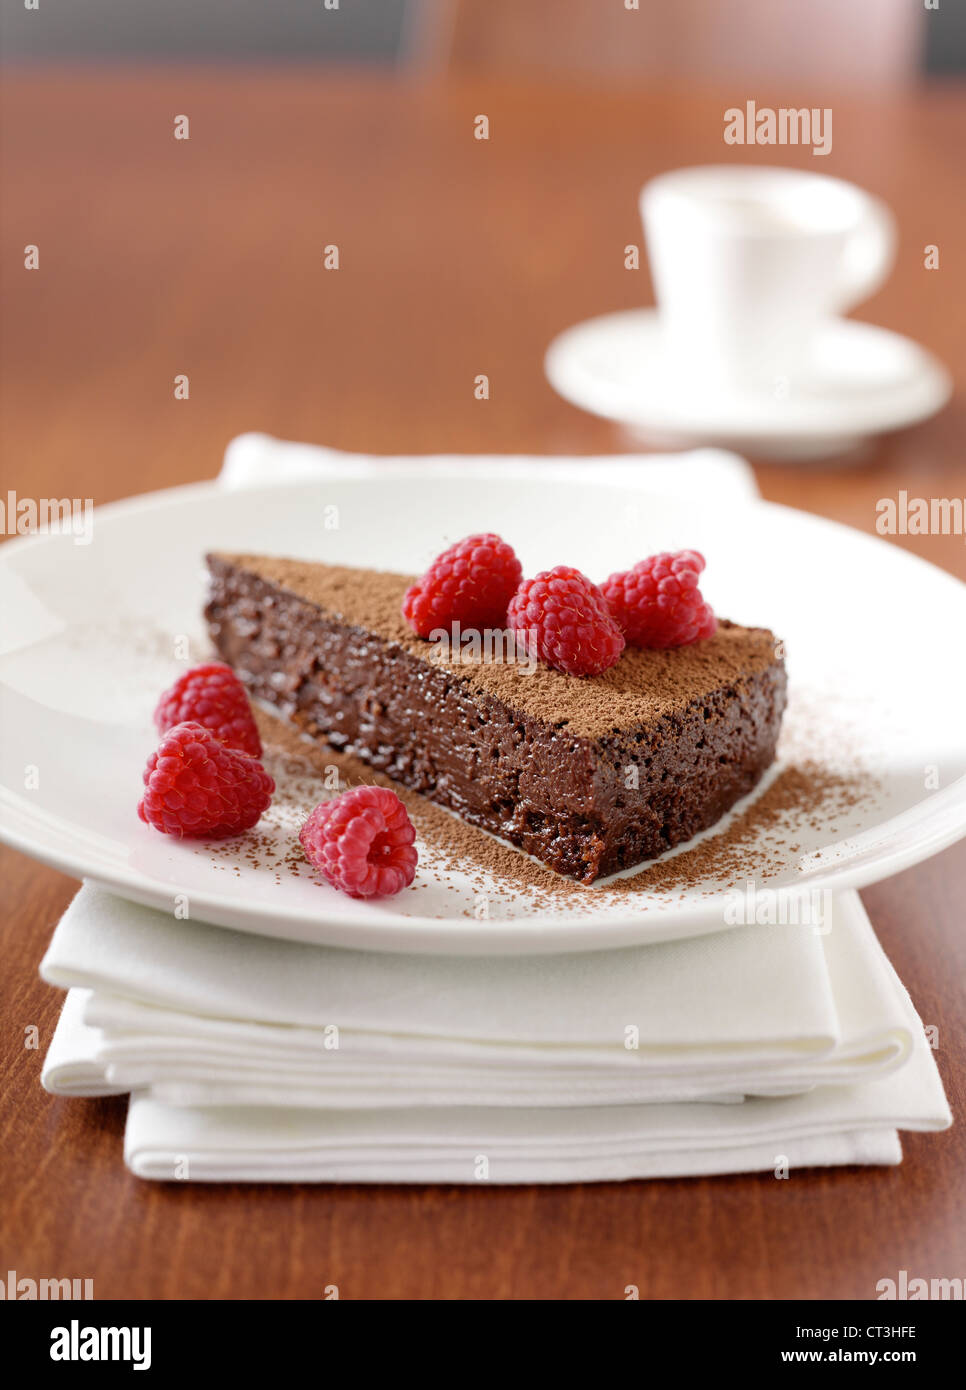 Plate of chocolate cake with berries Stock Photo